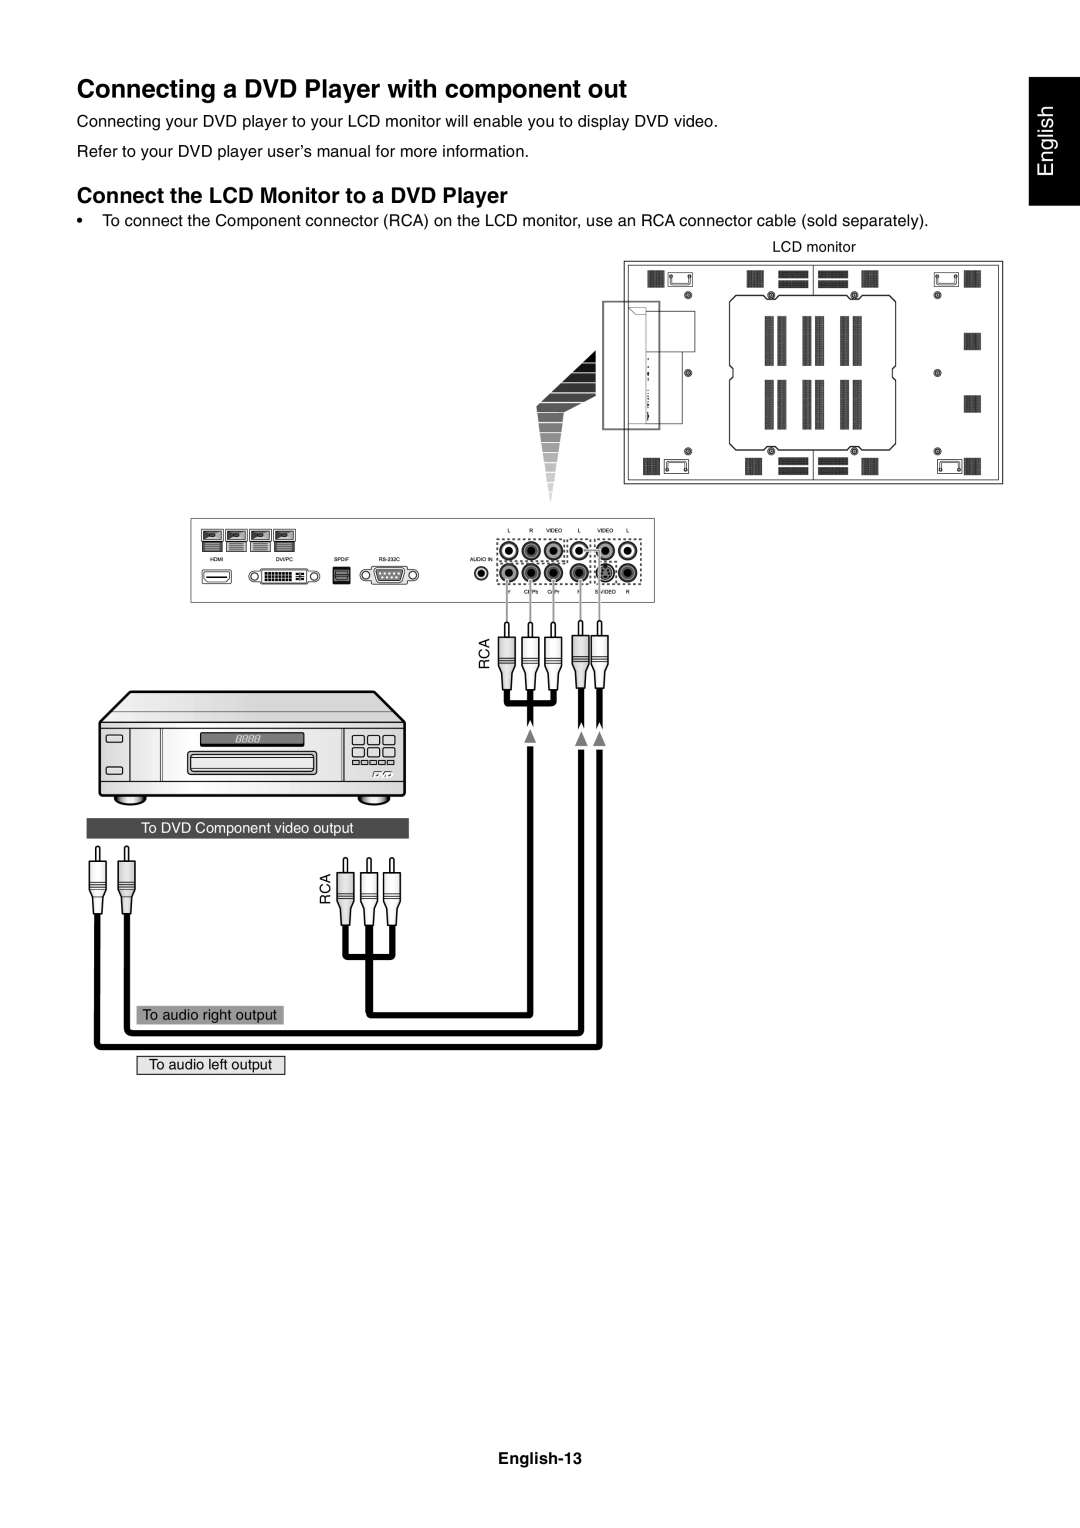 NEC LCD8205-P user manual Connecting a DVD Player with component out, Connect the LCD Monitor to a DVD Player, English 